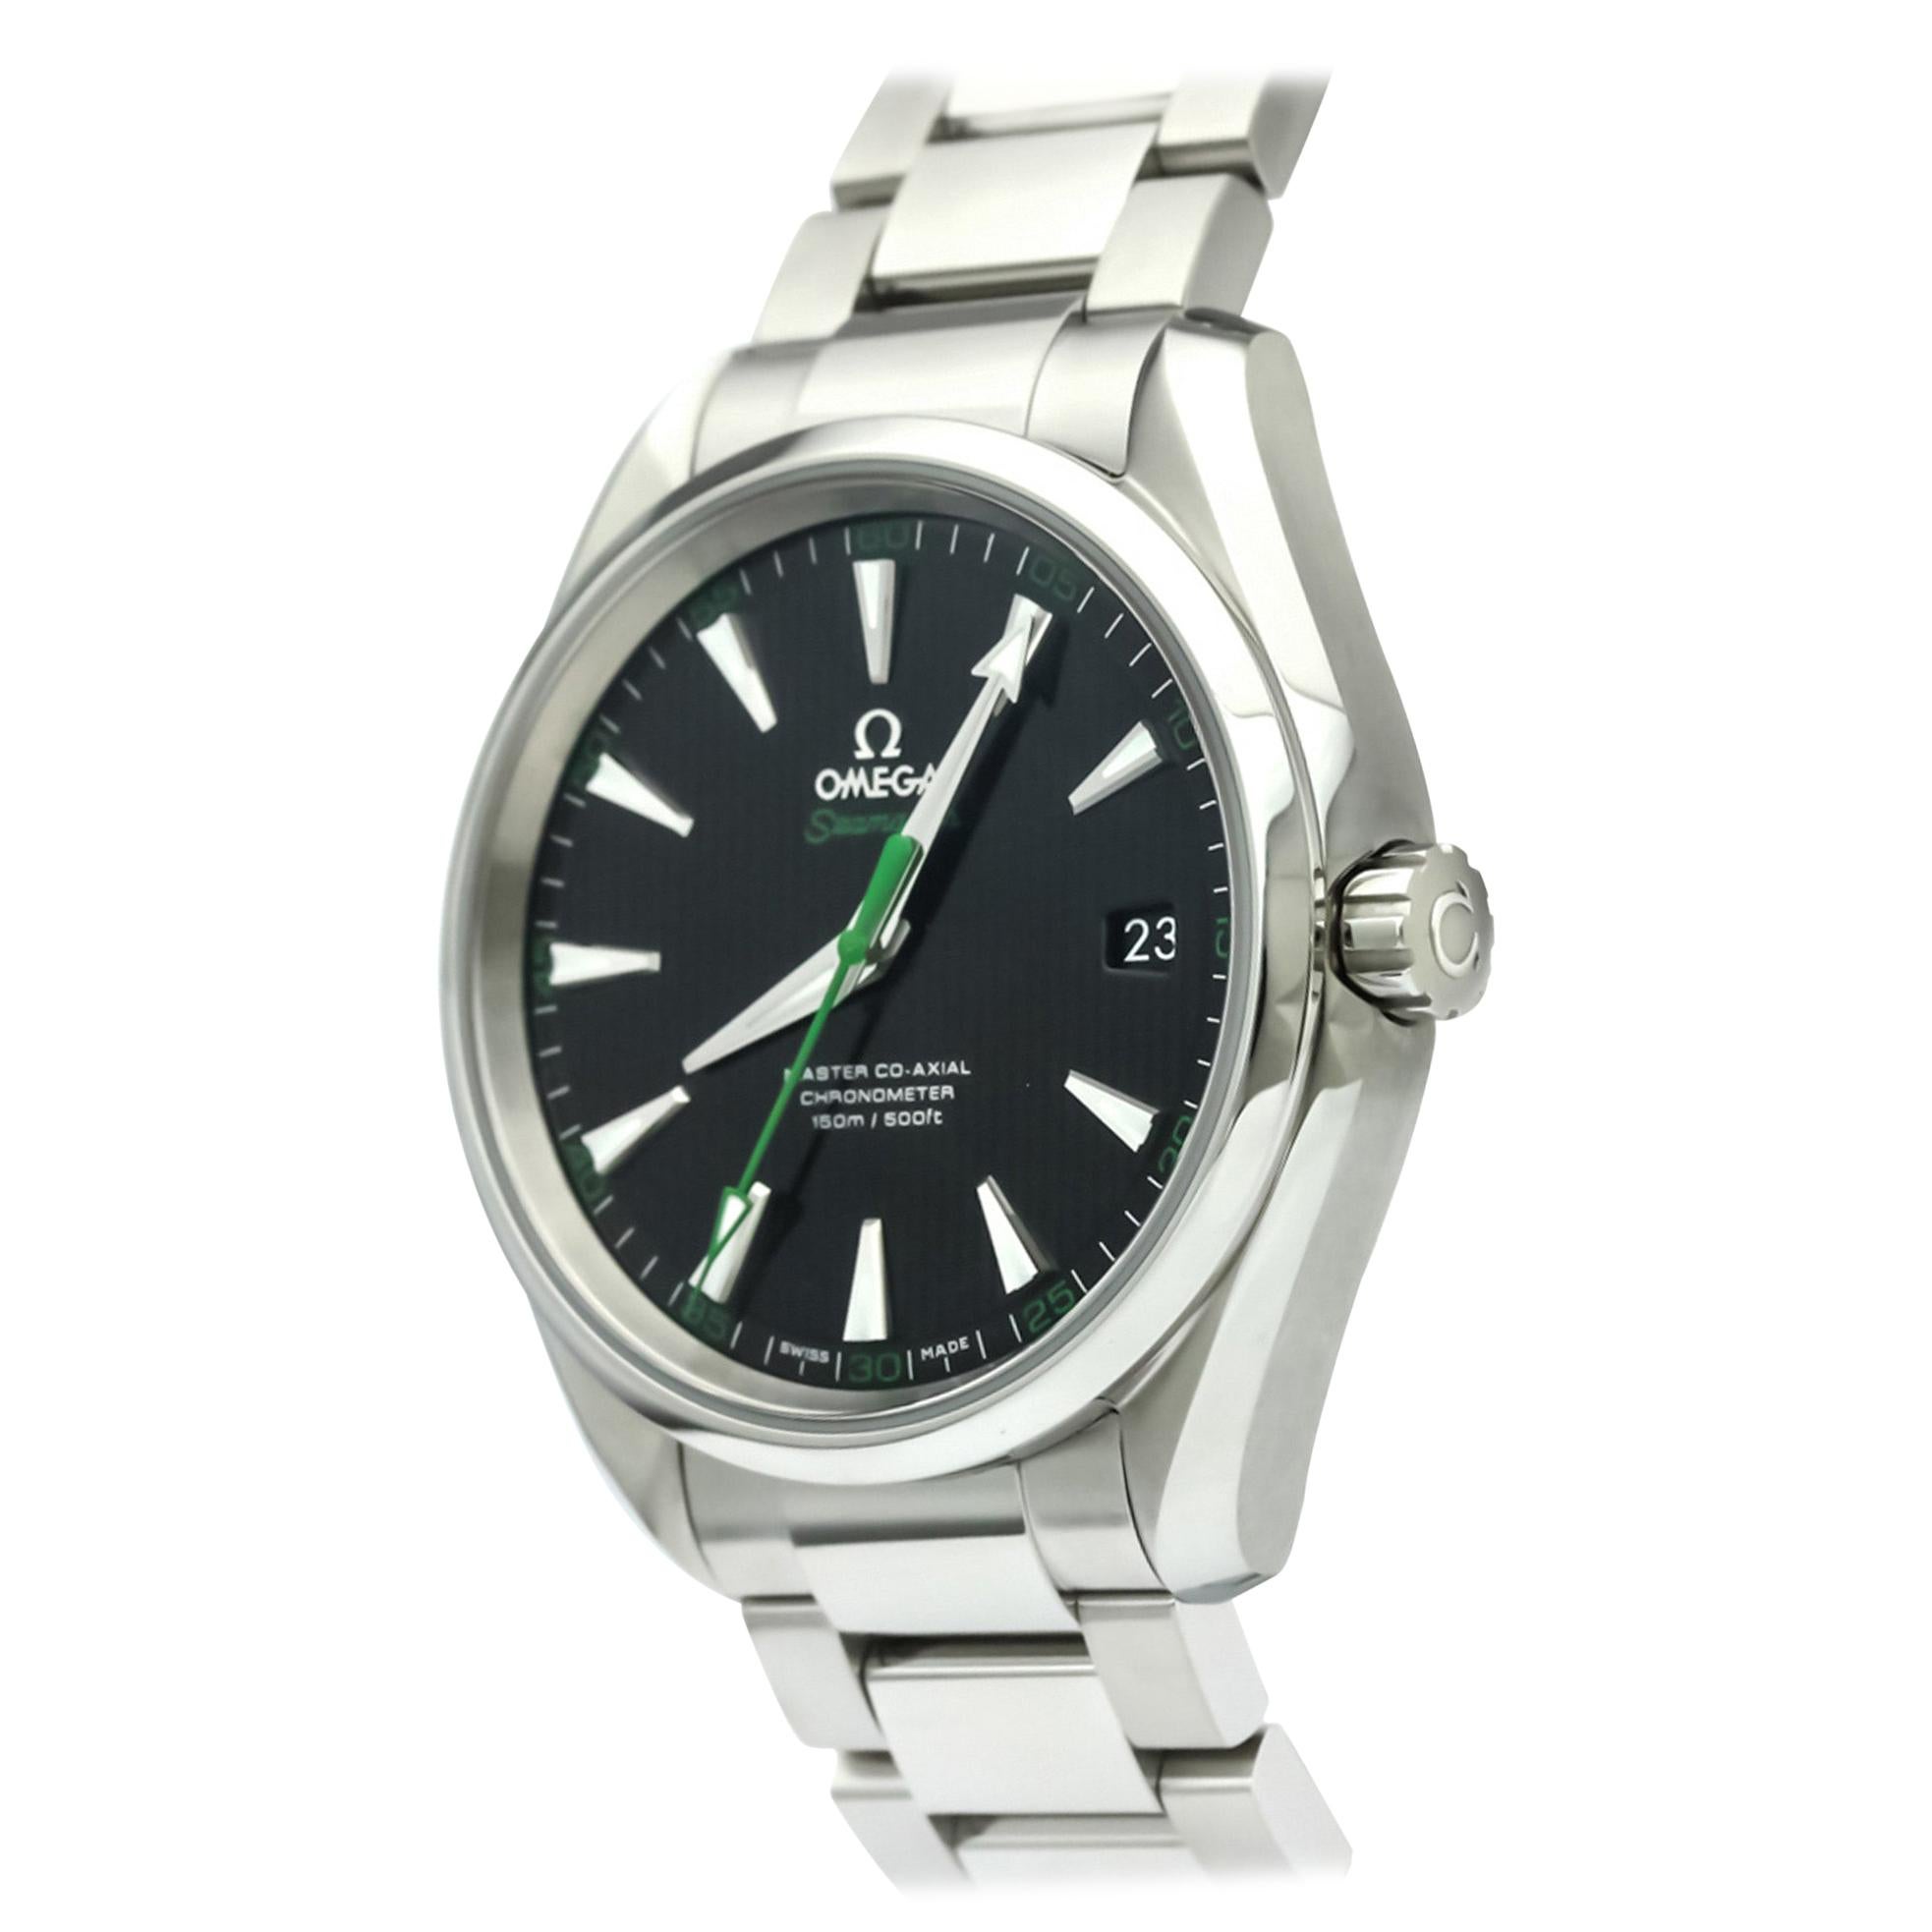 Vintage Authentic Seamaster Aqua Terra Master Co Axial Golf Edition Automatic Wa For Sale